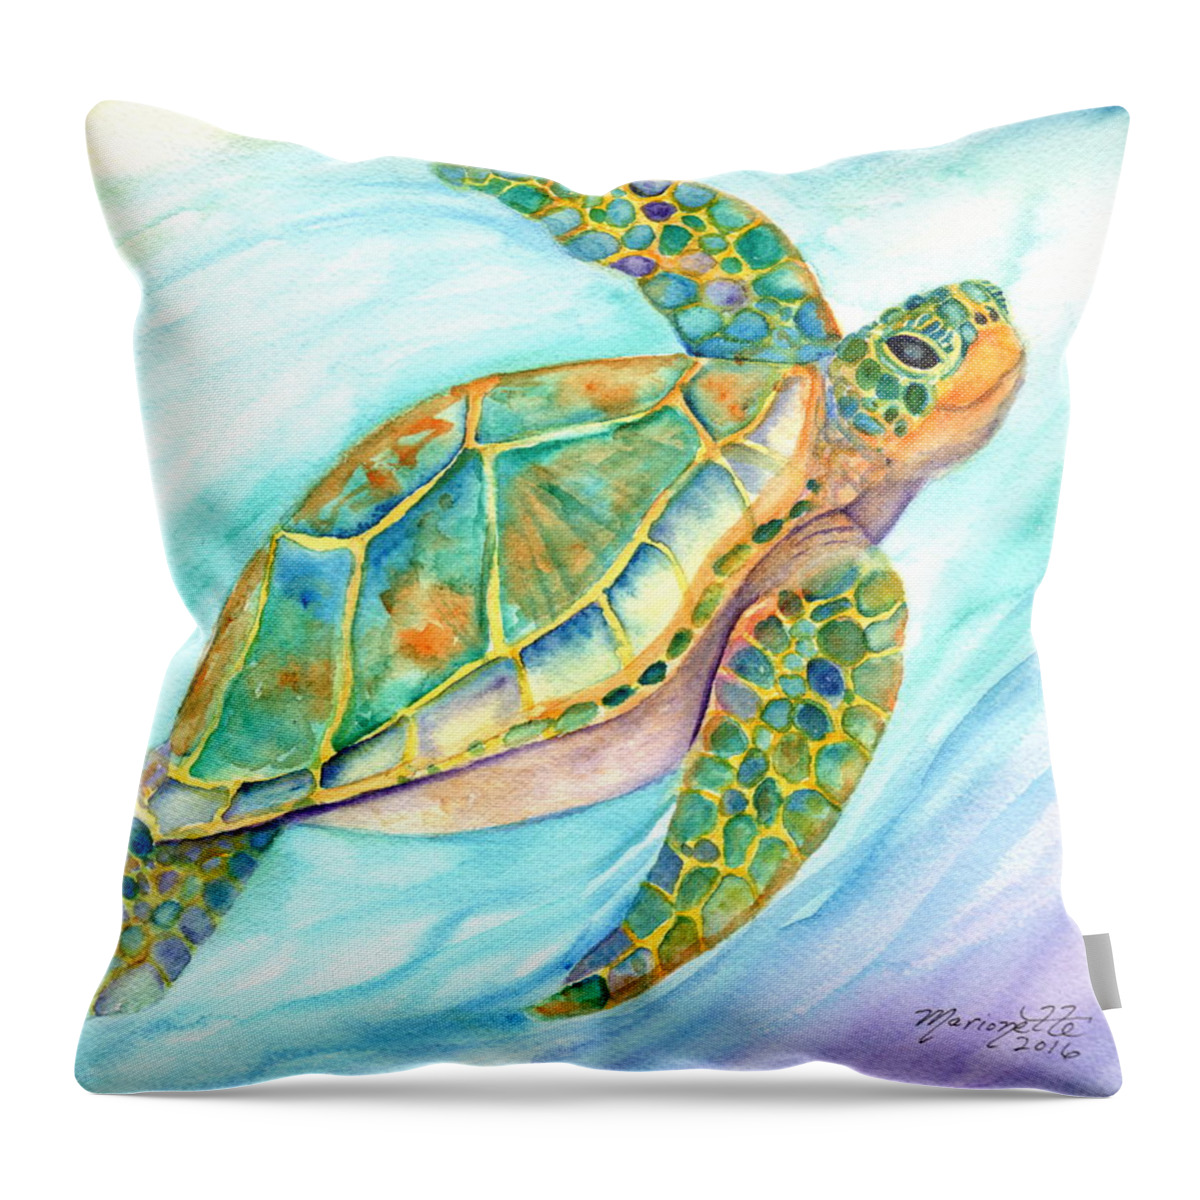 Kauai Art Throw Pillow featuring the painting Swimming, Smiling Sea Turtle by Marionette Taboniar